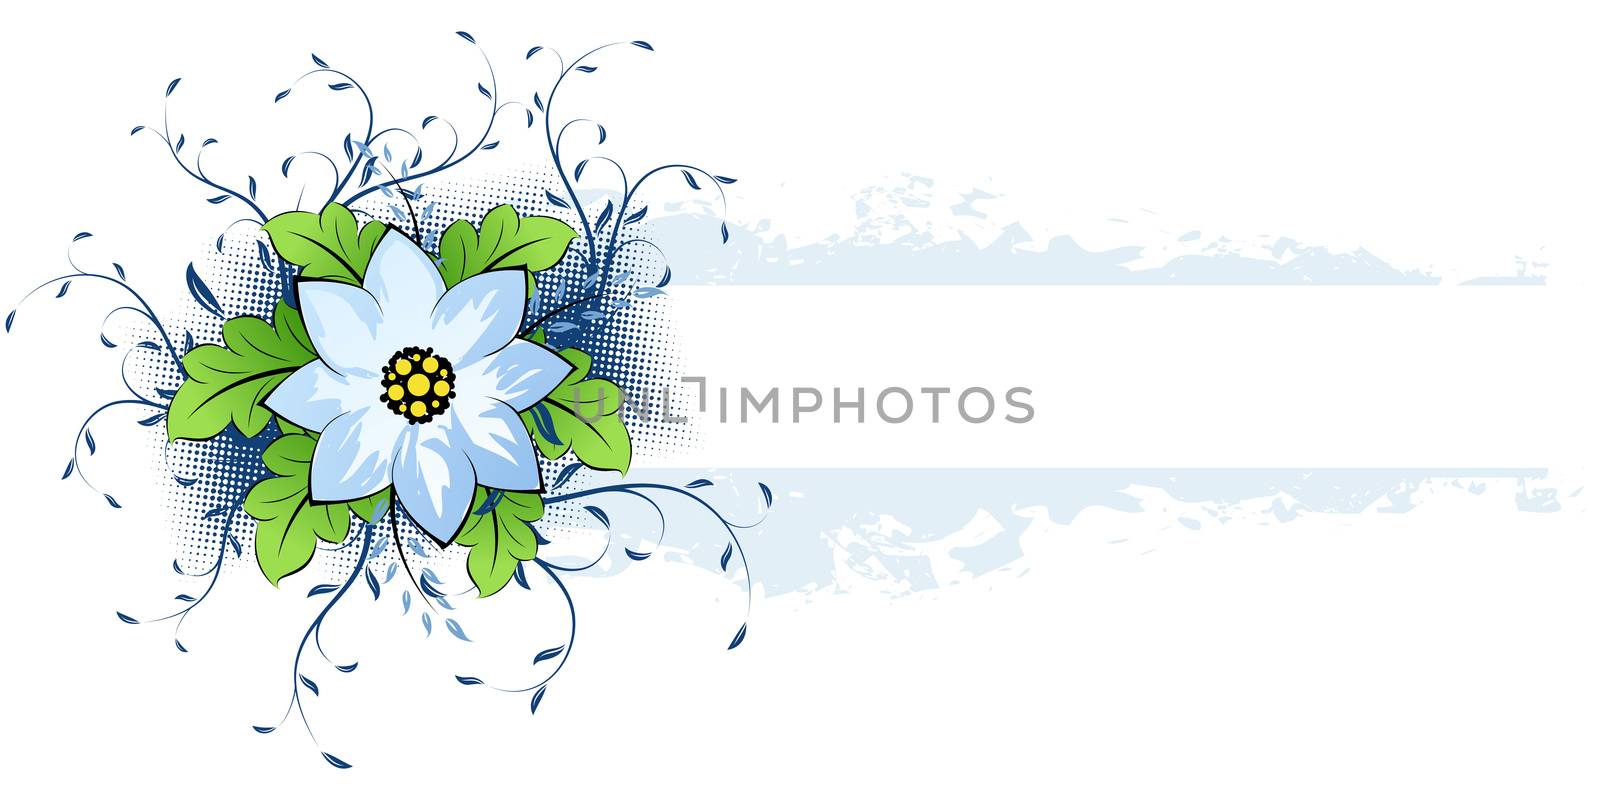 Grunge Vector AD with summer flower and leaves